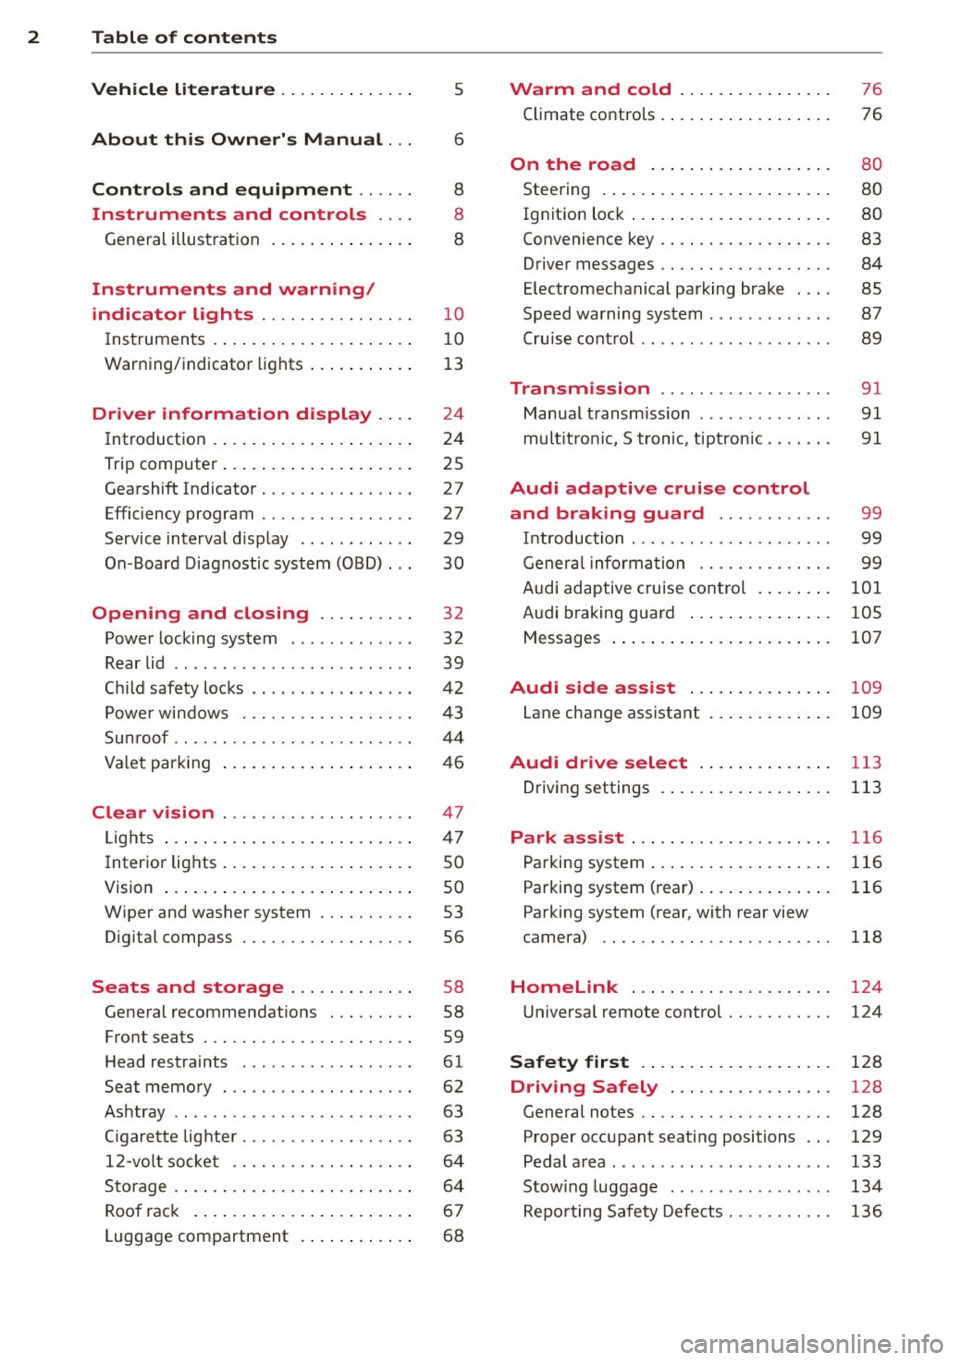 AUDI S4 2014  Owners Manual 2  Table  of  contents Vehicle  literature  .. .. .. .. .. ... . 
5 
About  this  Owners  Manual . . . 6 
Controls  and  equipment  .. ...  . 
Ins truments  and  controls  .. . . 
General  illus trat